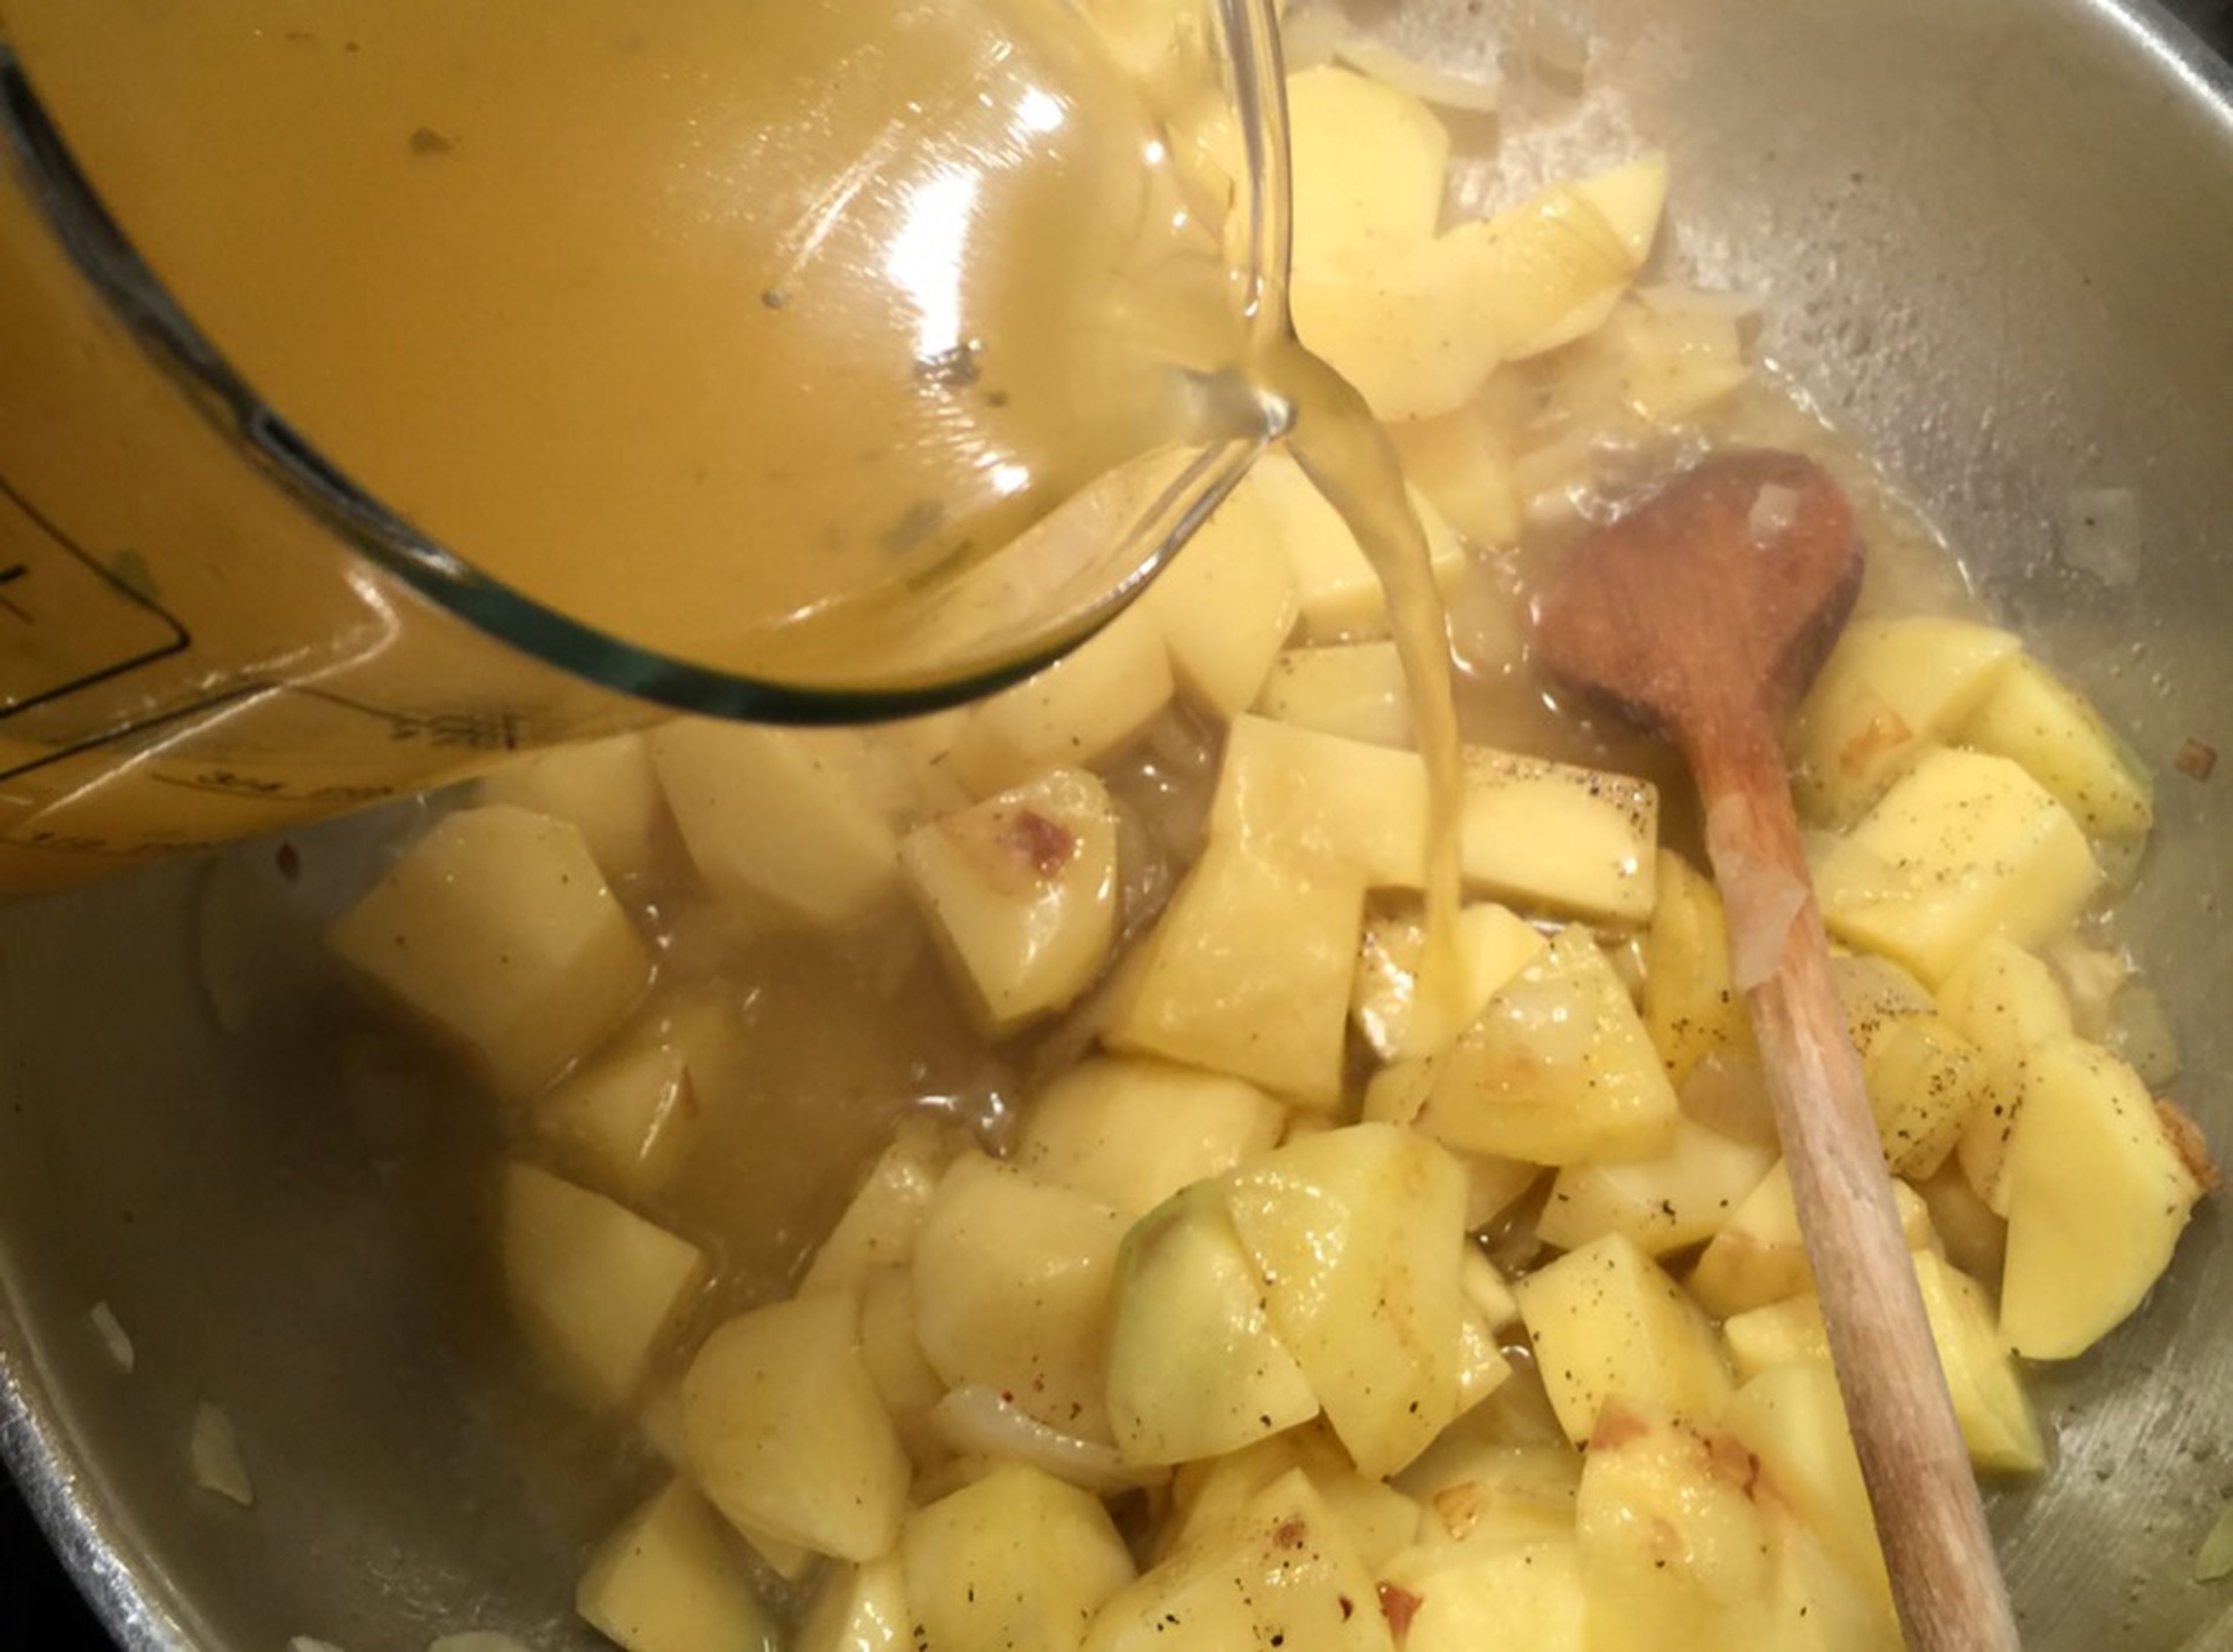 Add half of the vegetable broth and soy cream and stir to combine. Let the mixture simmer over medium-low heat for approx. 20 min., or until the potatoes are soft.